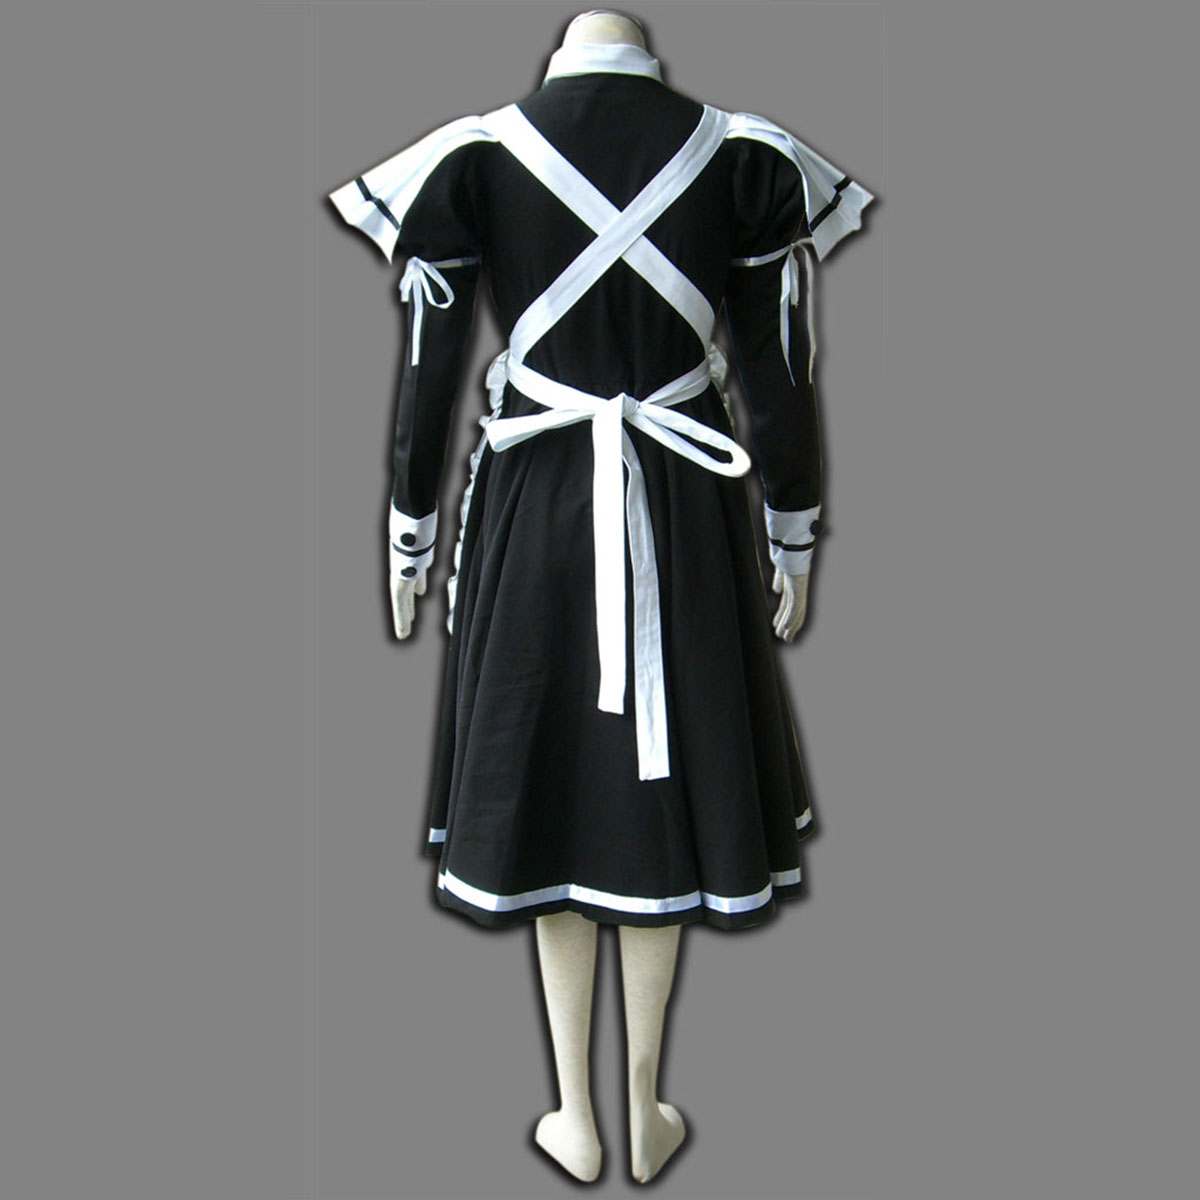 Maid Uniform 7 Deadly Weapon Cosplay Costumes AU